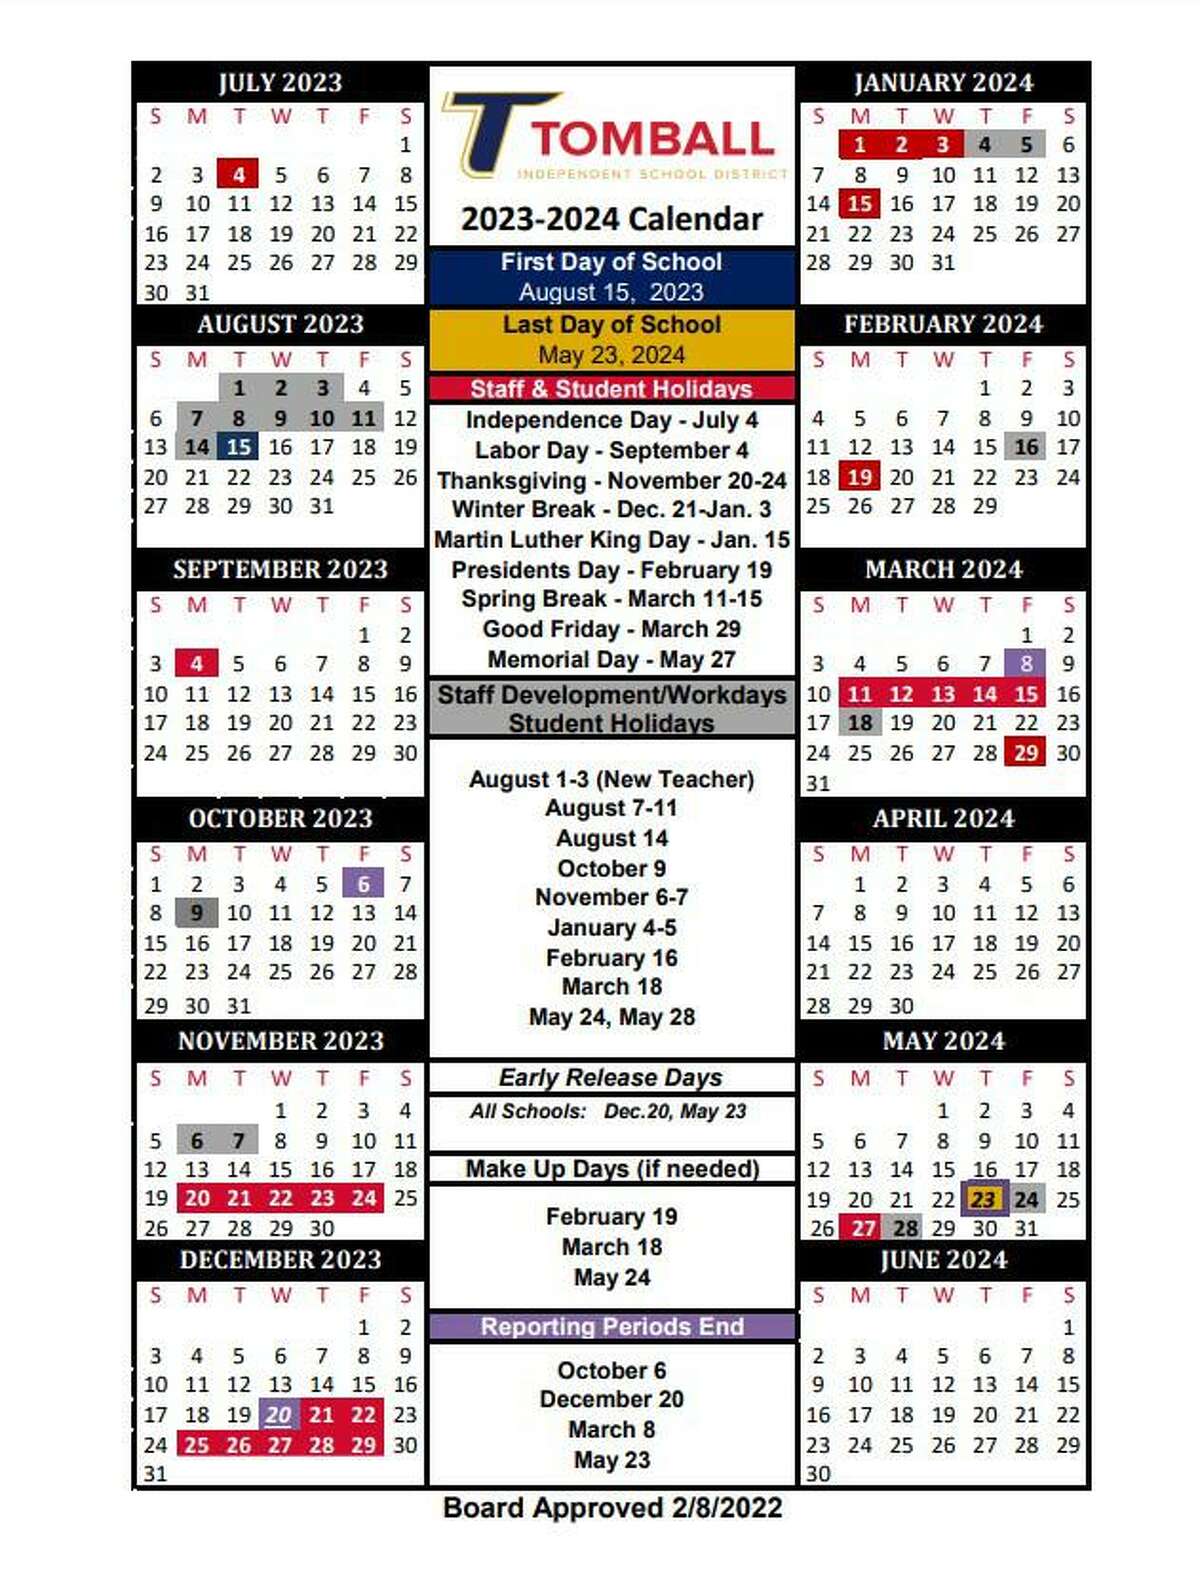 The Tomball ISD school board approved the instructional calendar for the 2023-2024 school year during the Feb. 8 meeting.